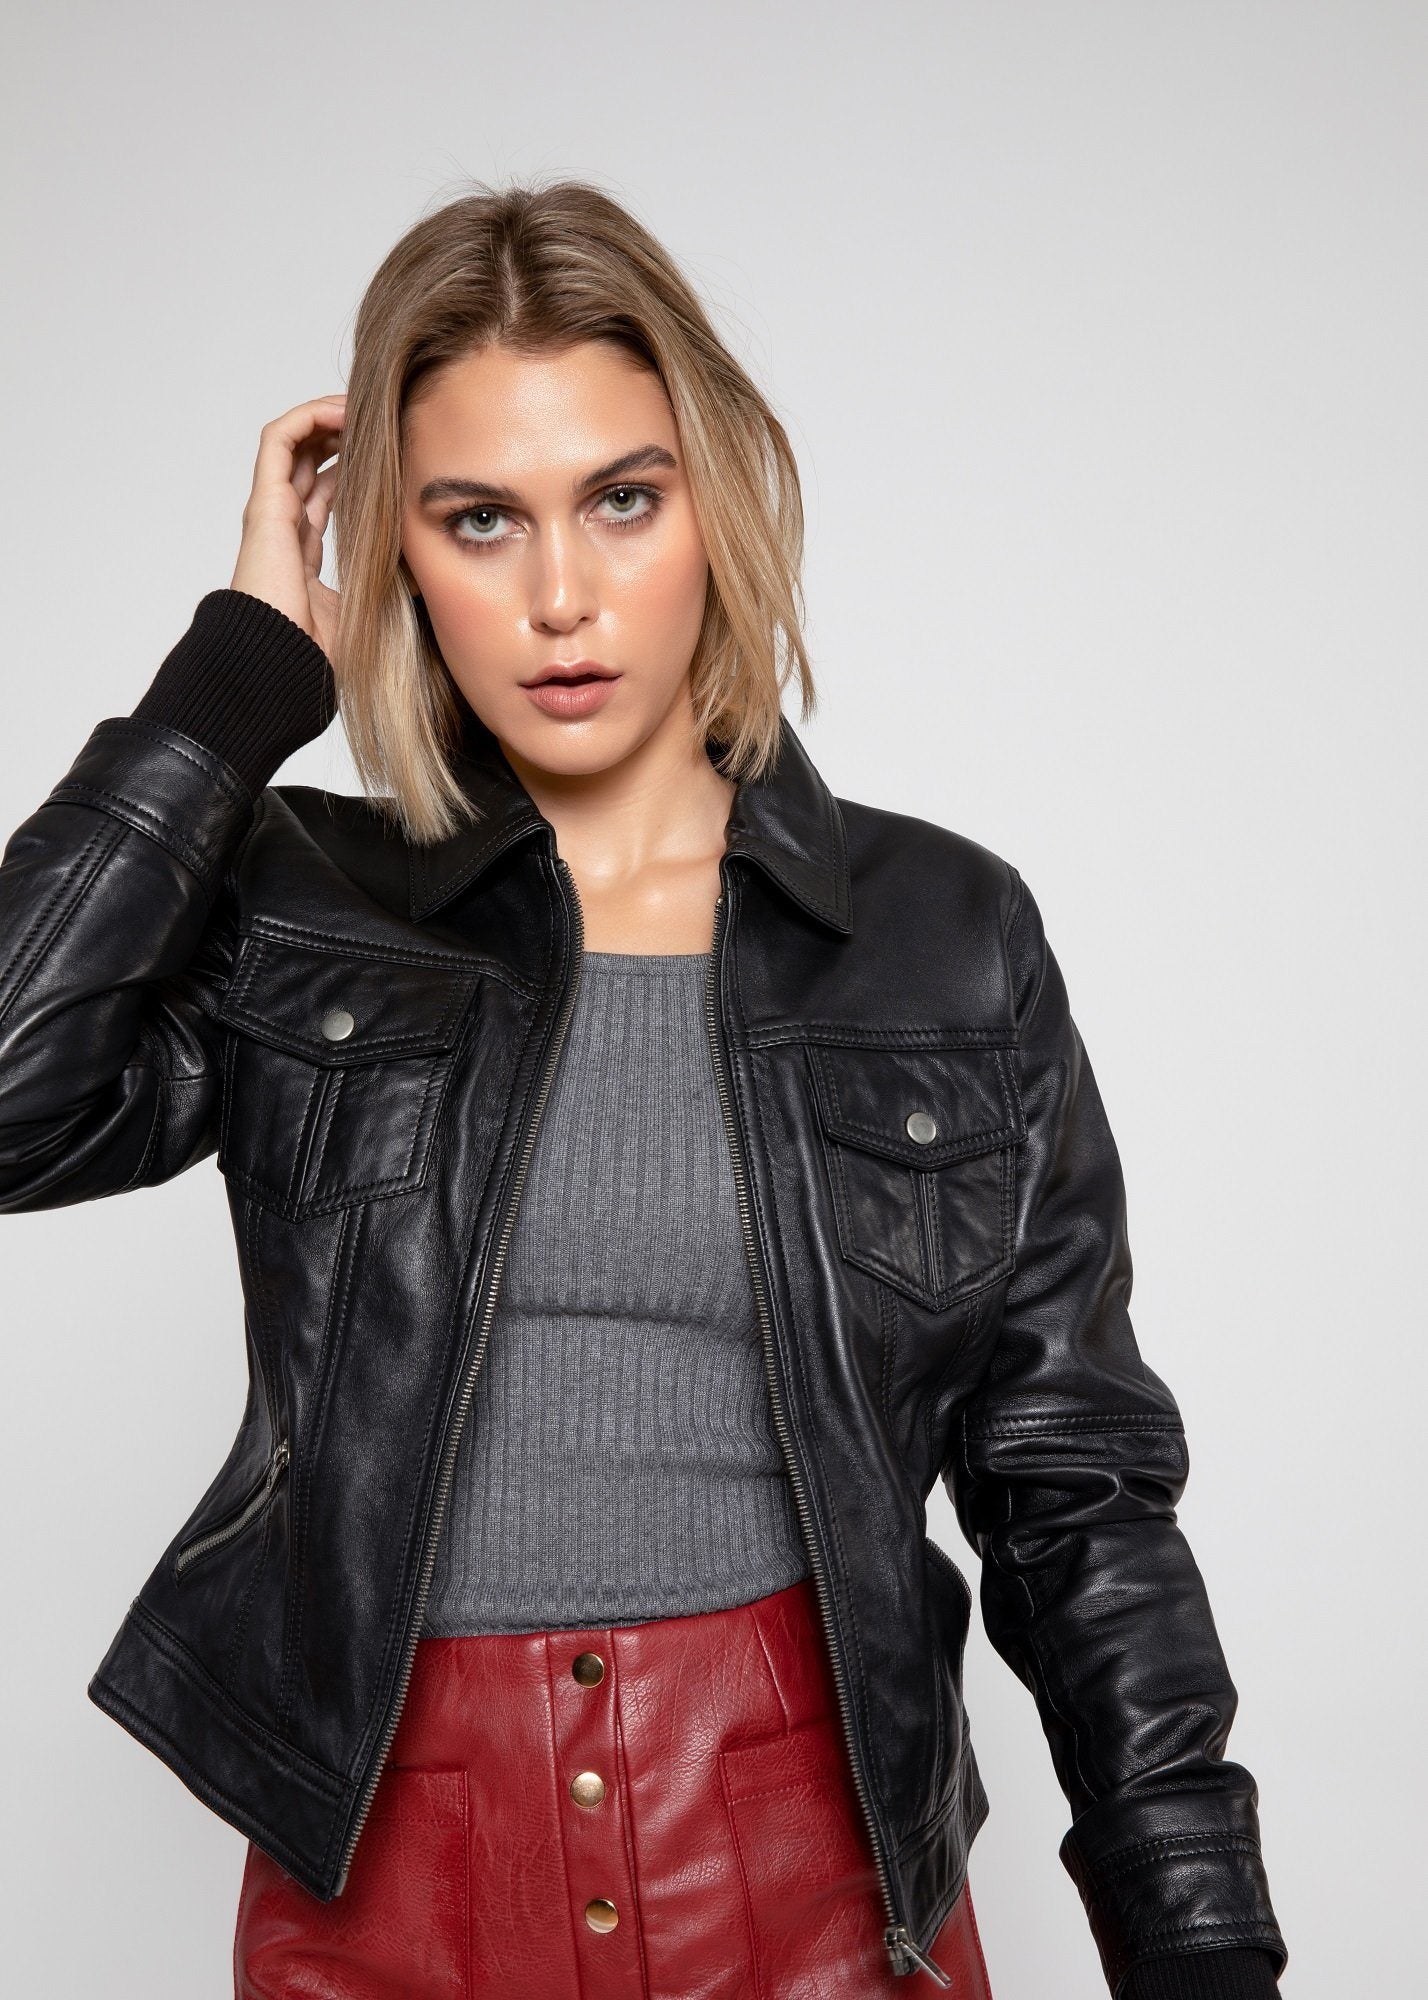 NooriLeather Womens Cropped Leather Jacket